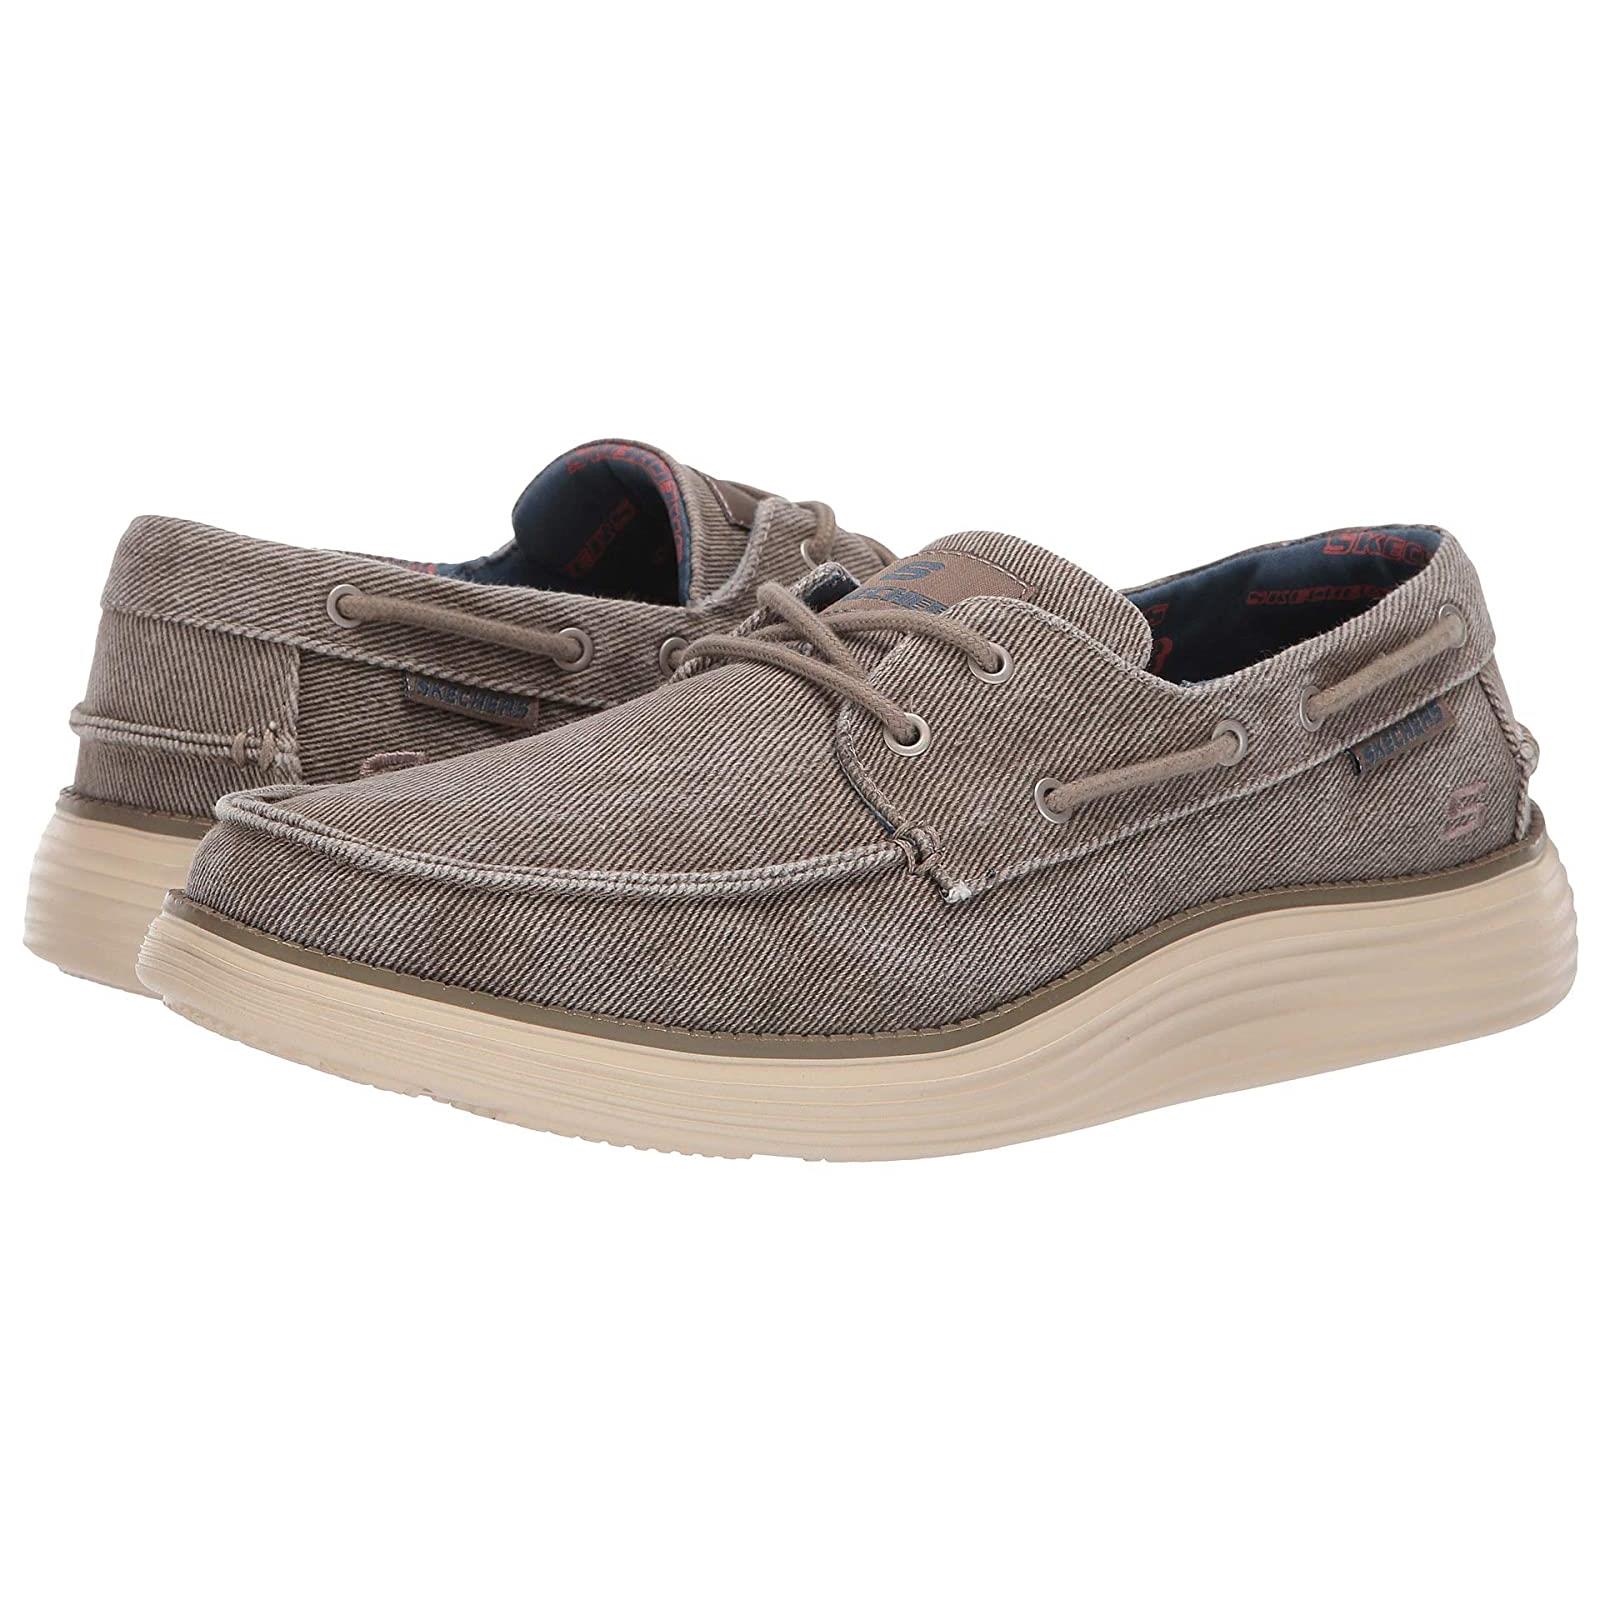 Man`s Boat Shoes Skechers Status 2.0 - Lorano Taupe